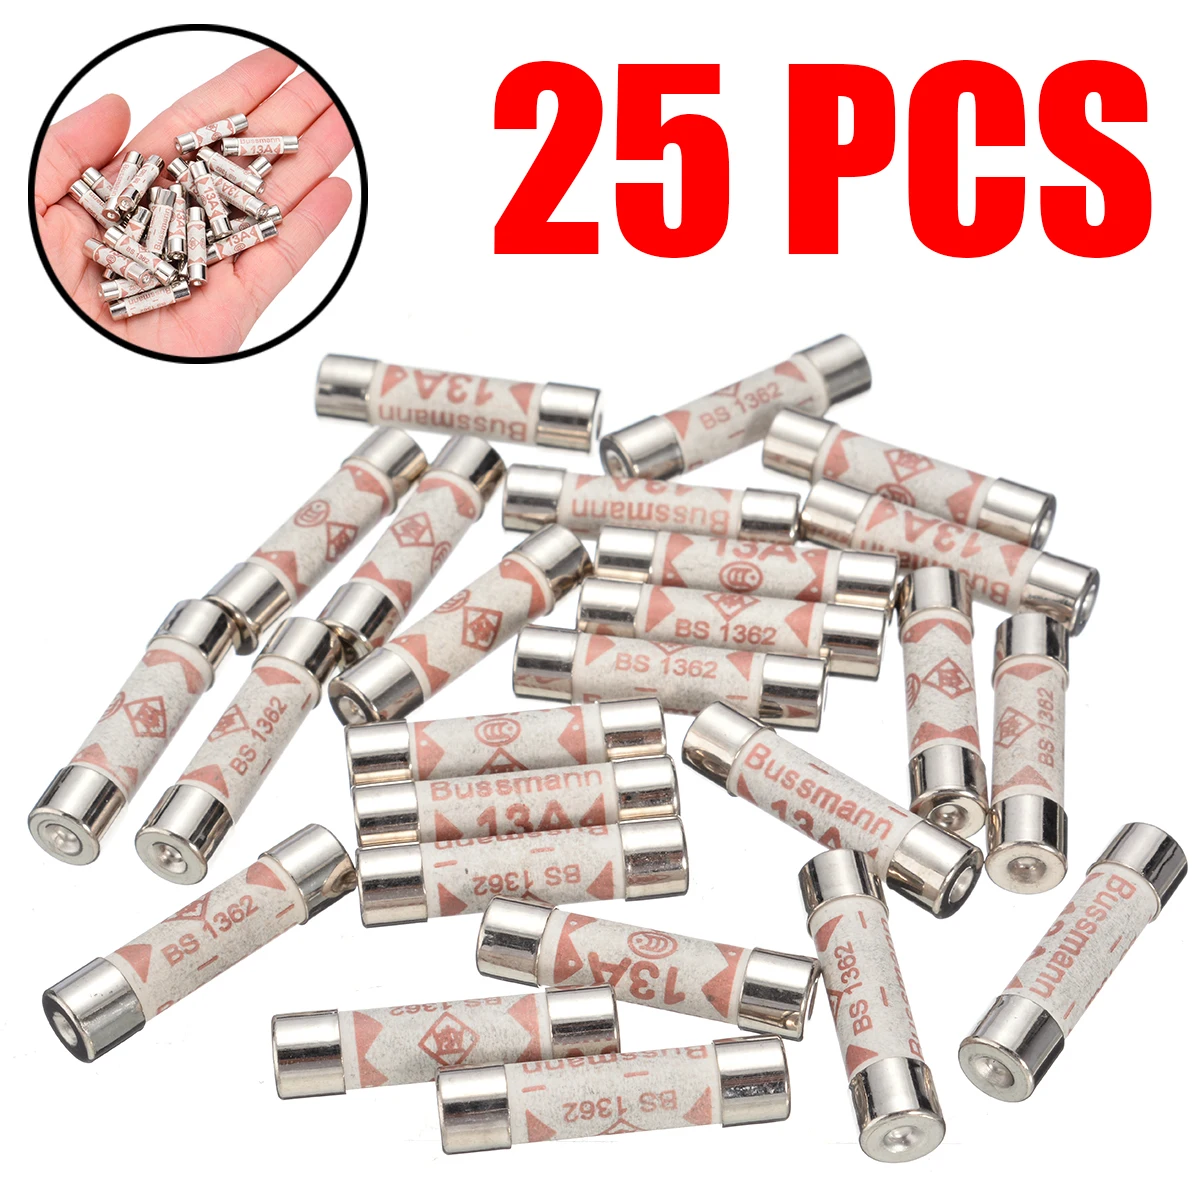 All Trade Direct 50 X 13 Amp Domestic 240V Household Mains Plug Fuse Electrical Cartridge Fuses